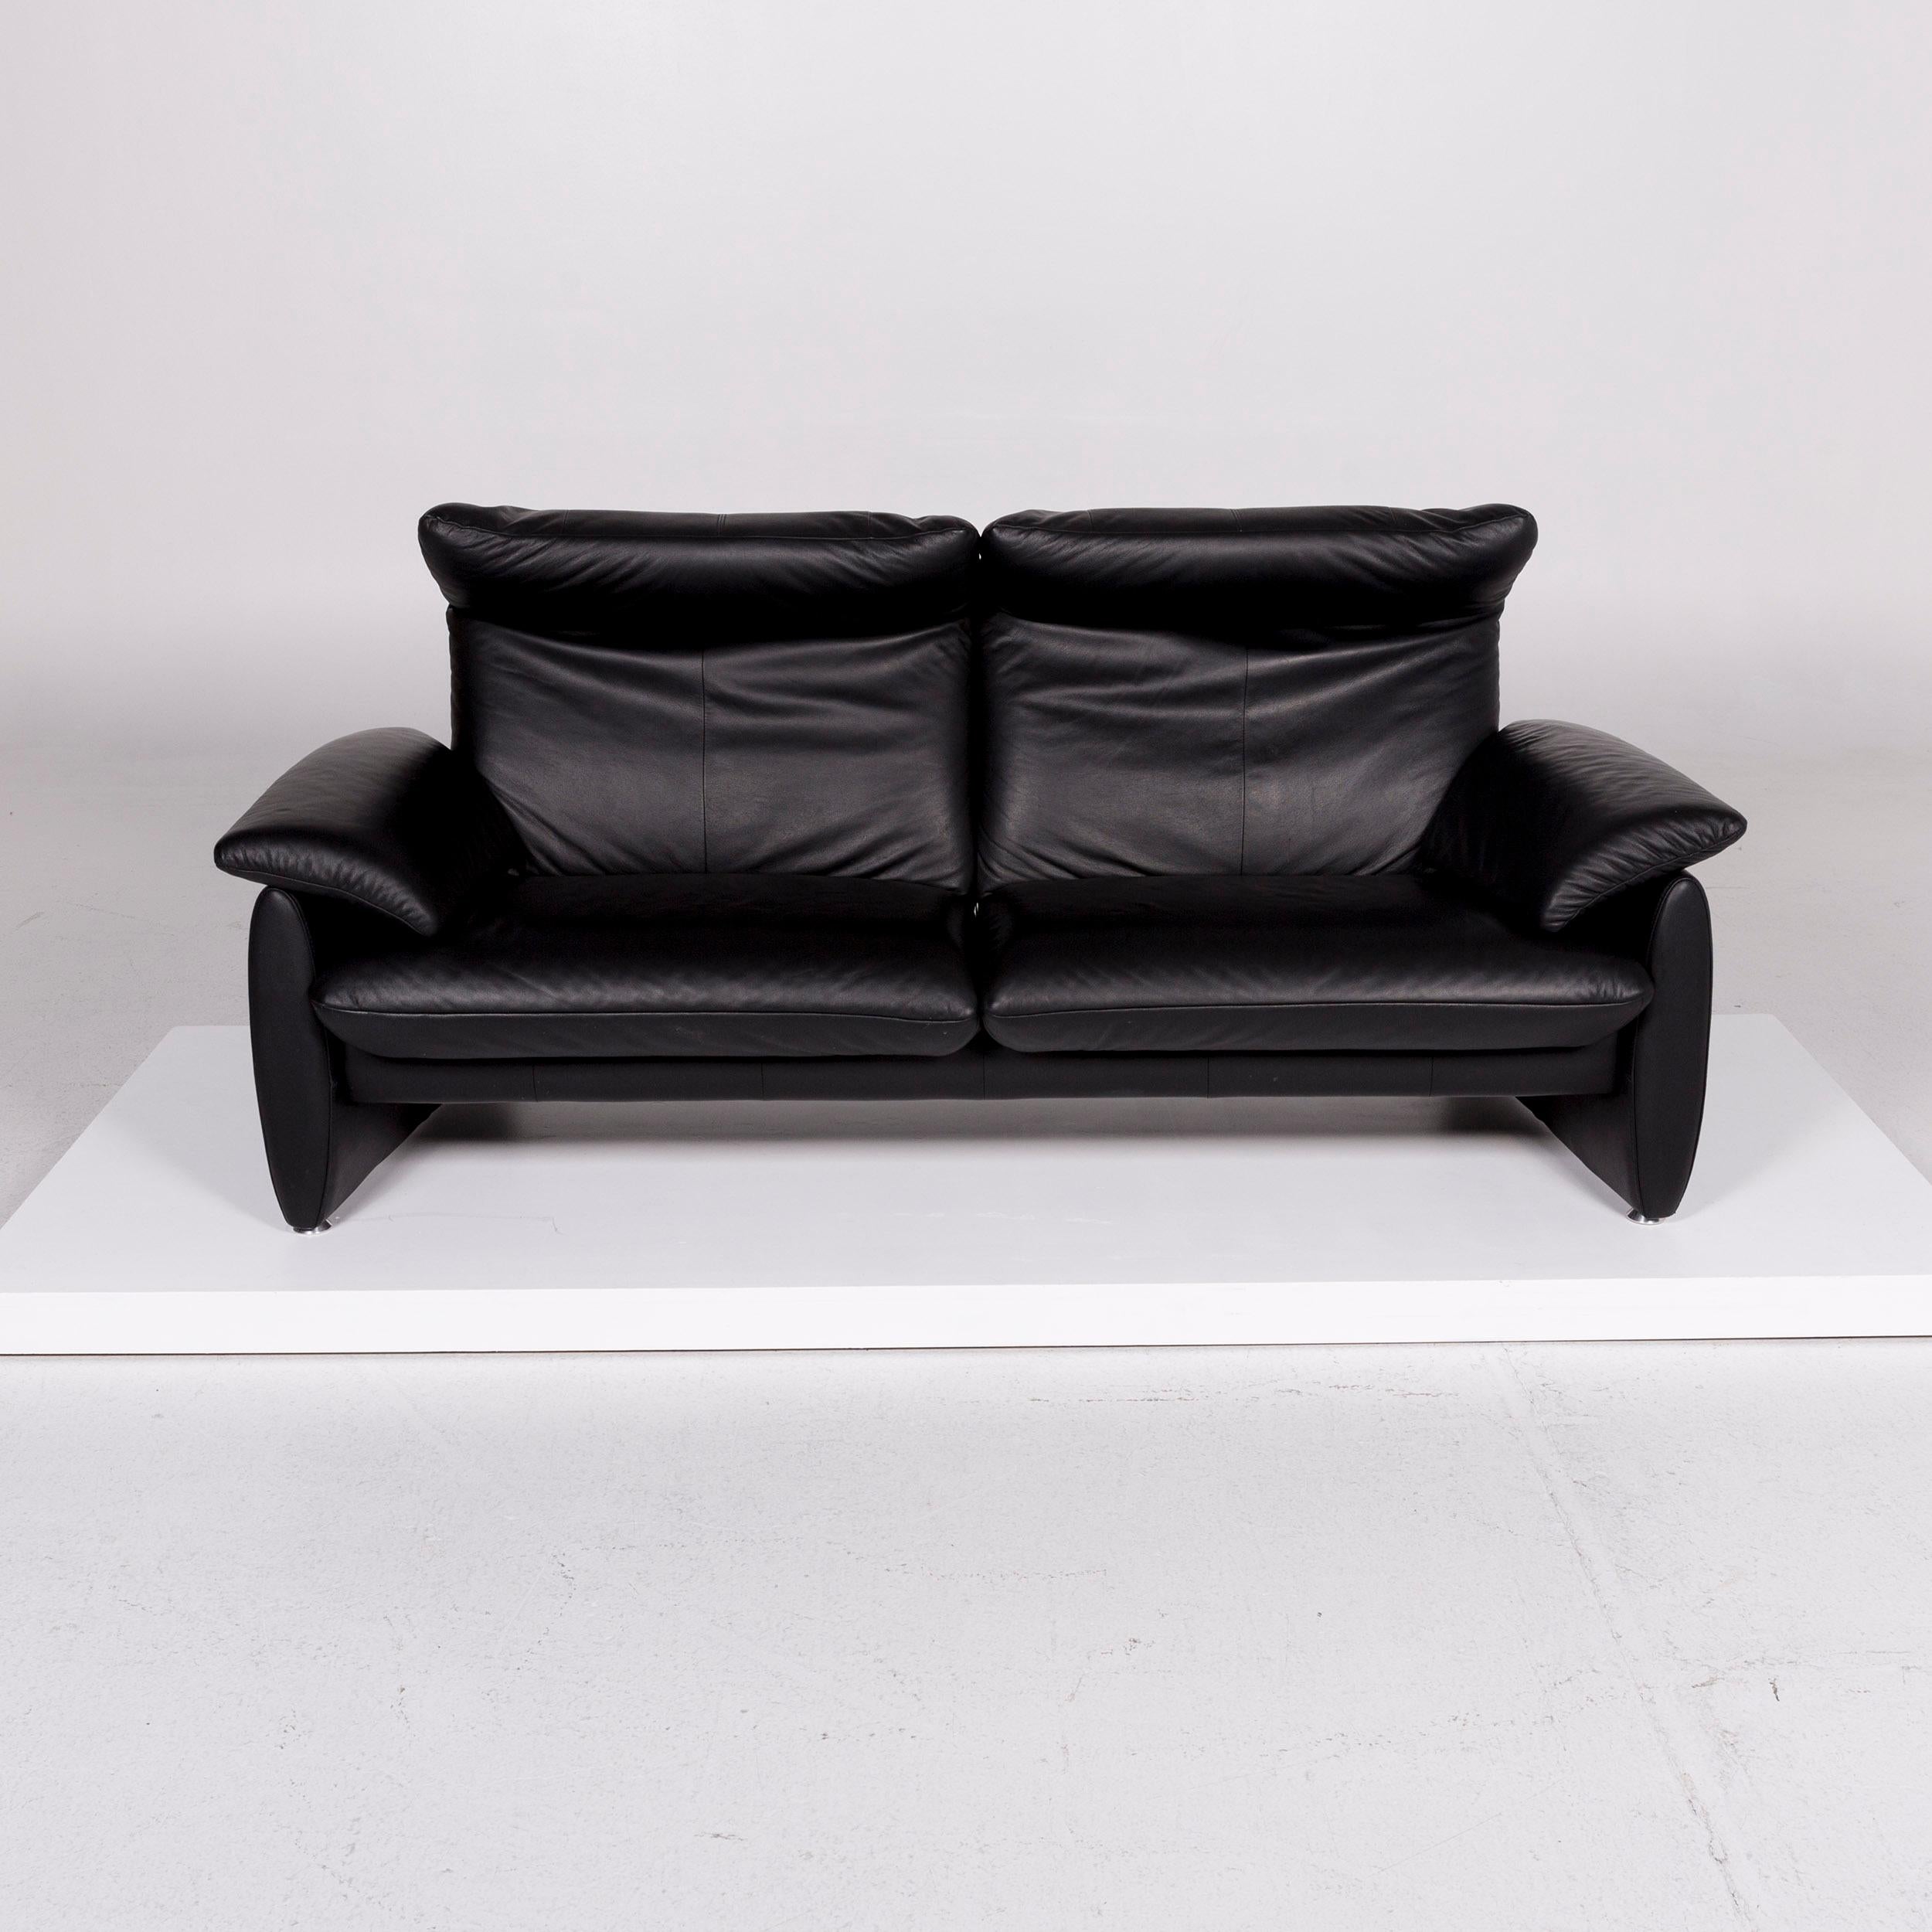 Contemporary Laauser Leather Sofa Black Two-Seat Function Couch For Sale